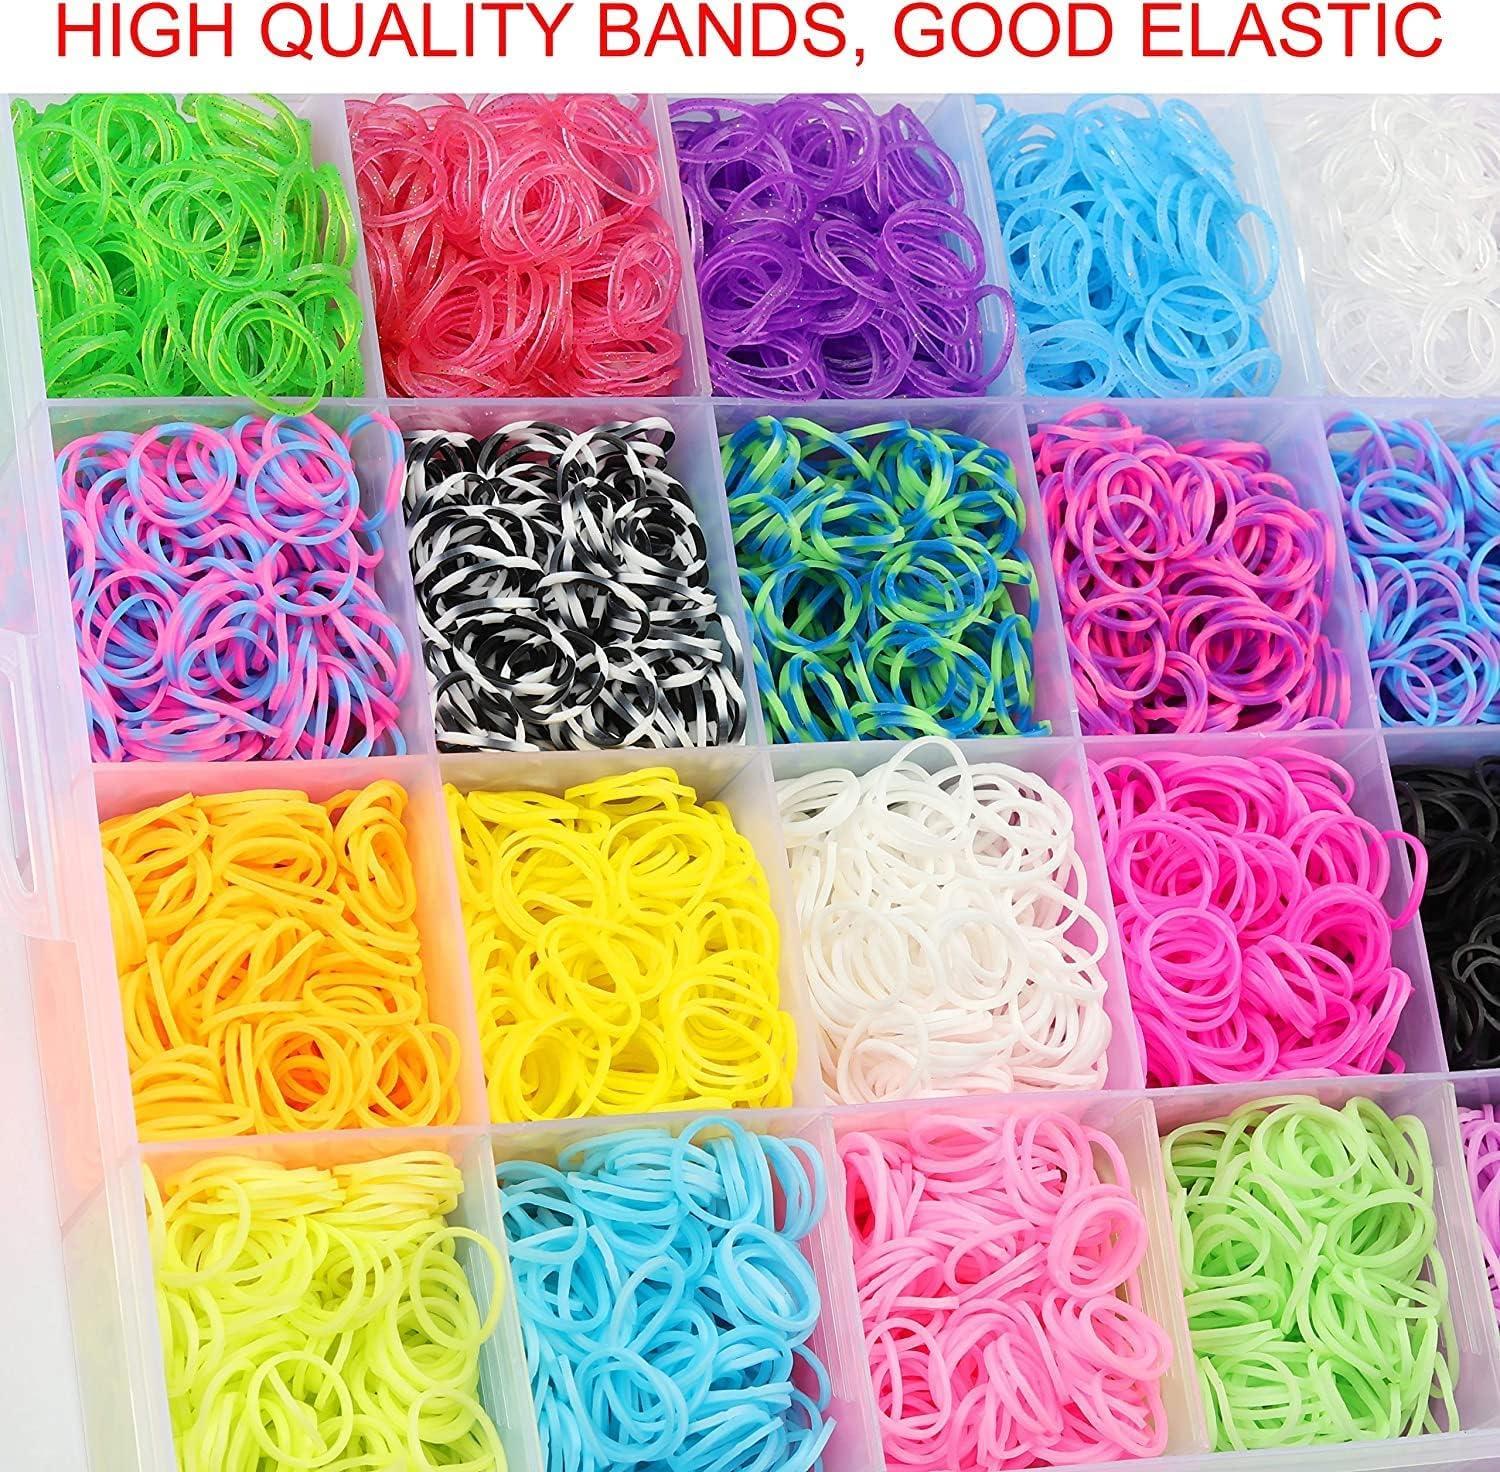 5500+ Loom Bracelet Making Kit Set, 12 Solid Colors Loom Rubber Bands with  Premium Quality Accessories,Including Multifunction Crochet Loom and Manual